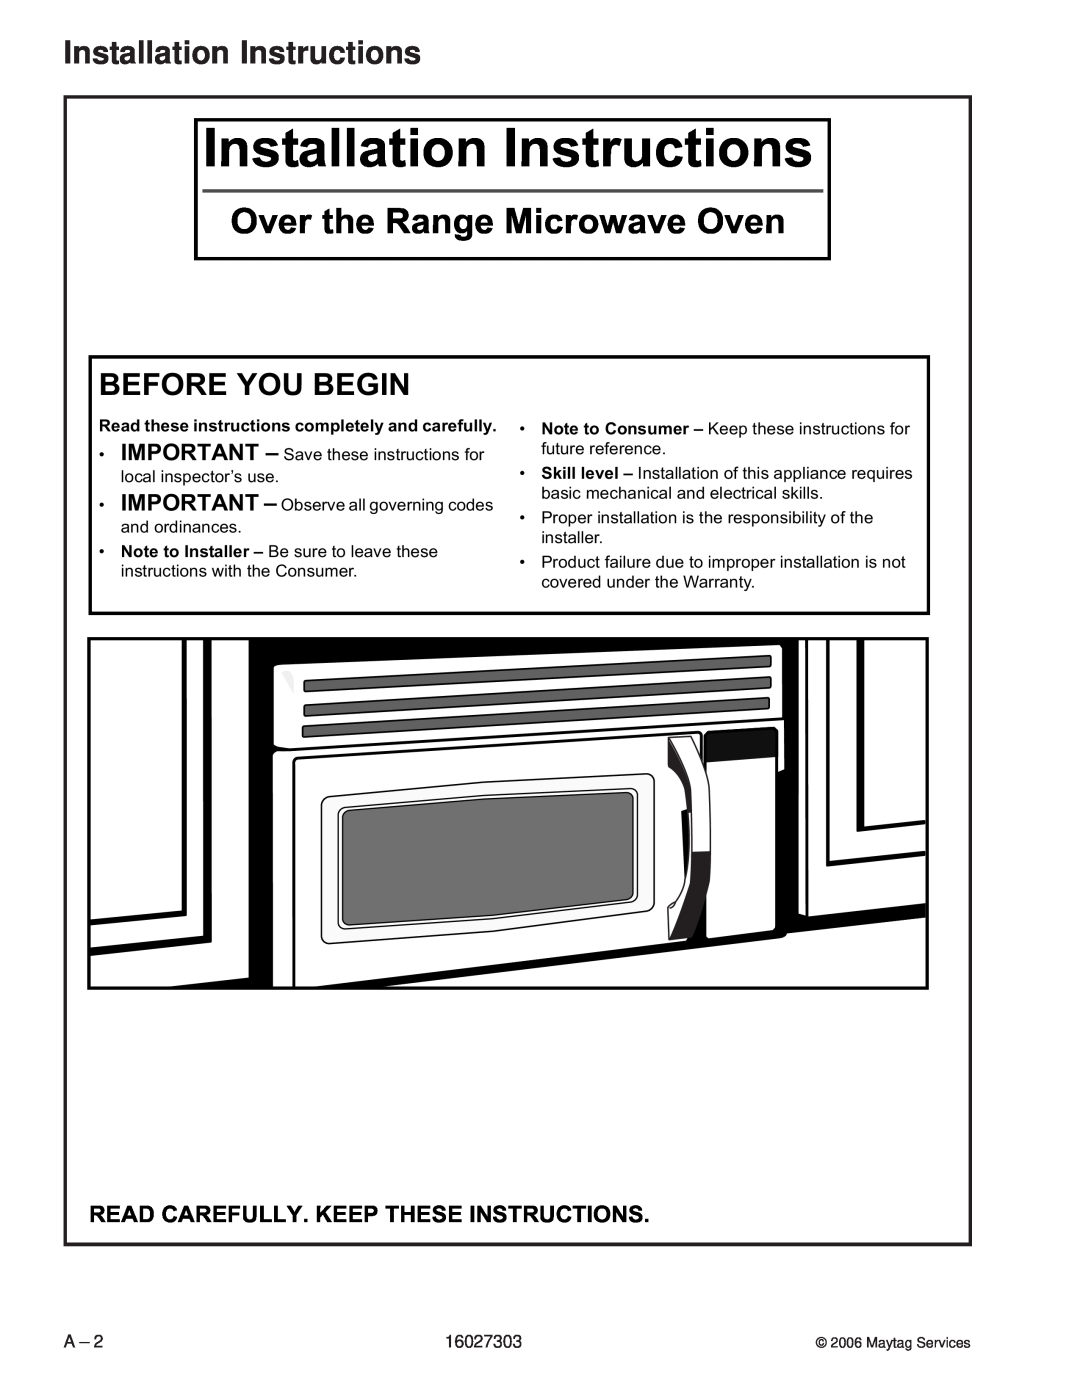 Maytag UMV1152CA manual Installation Instructions, Before You Begin, Read Carefully. Keep These Instructions 